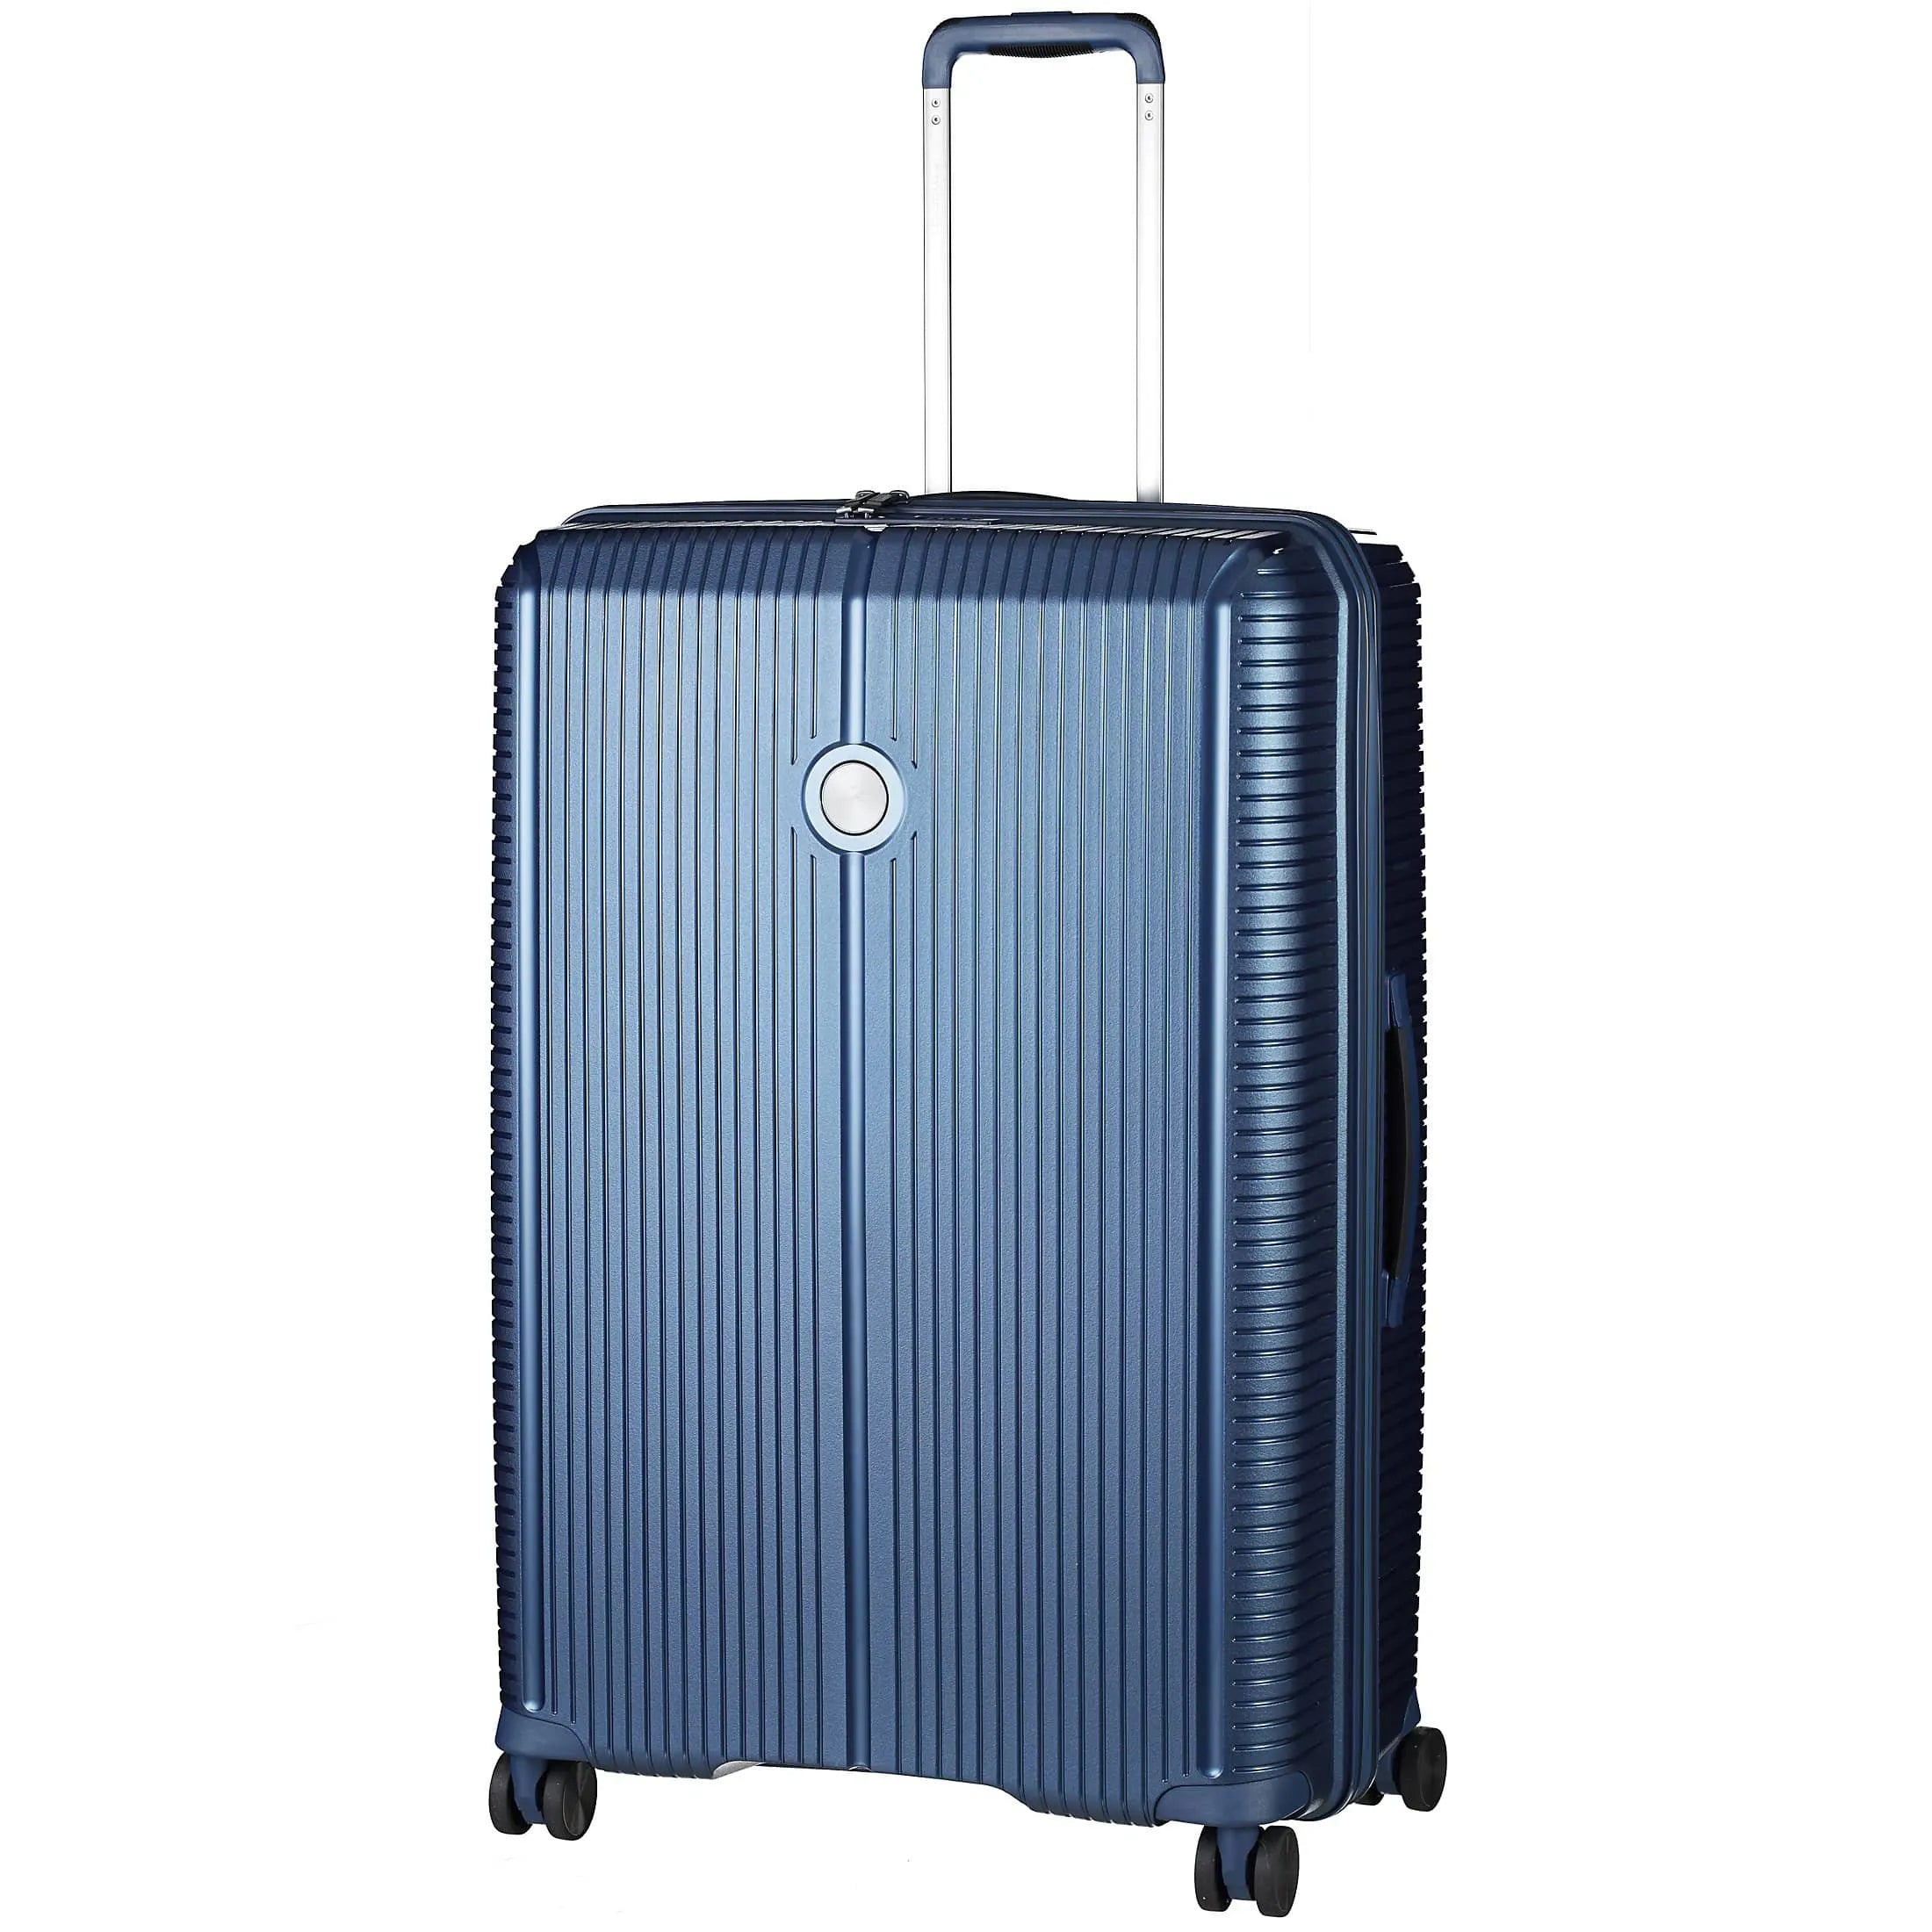 March 15 Trading Canyon 4-Rollen Trolley 76 cm - orion blue metal